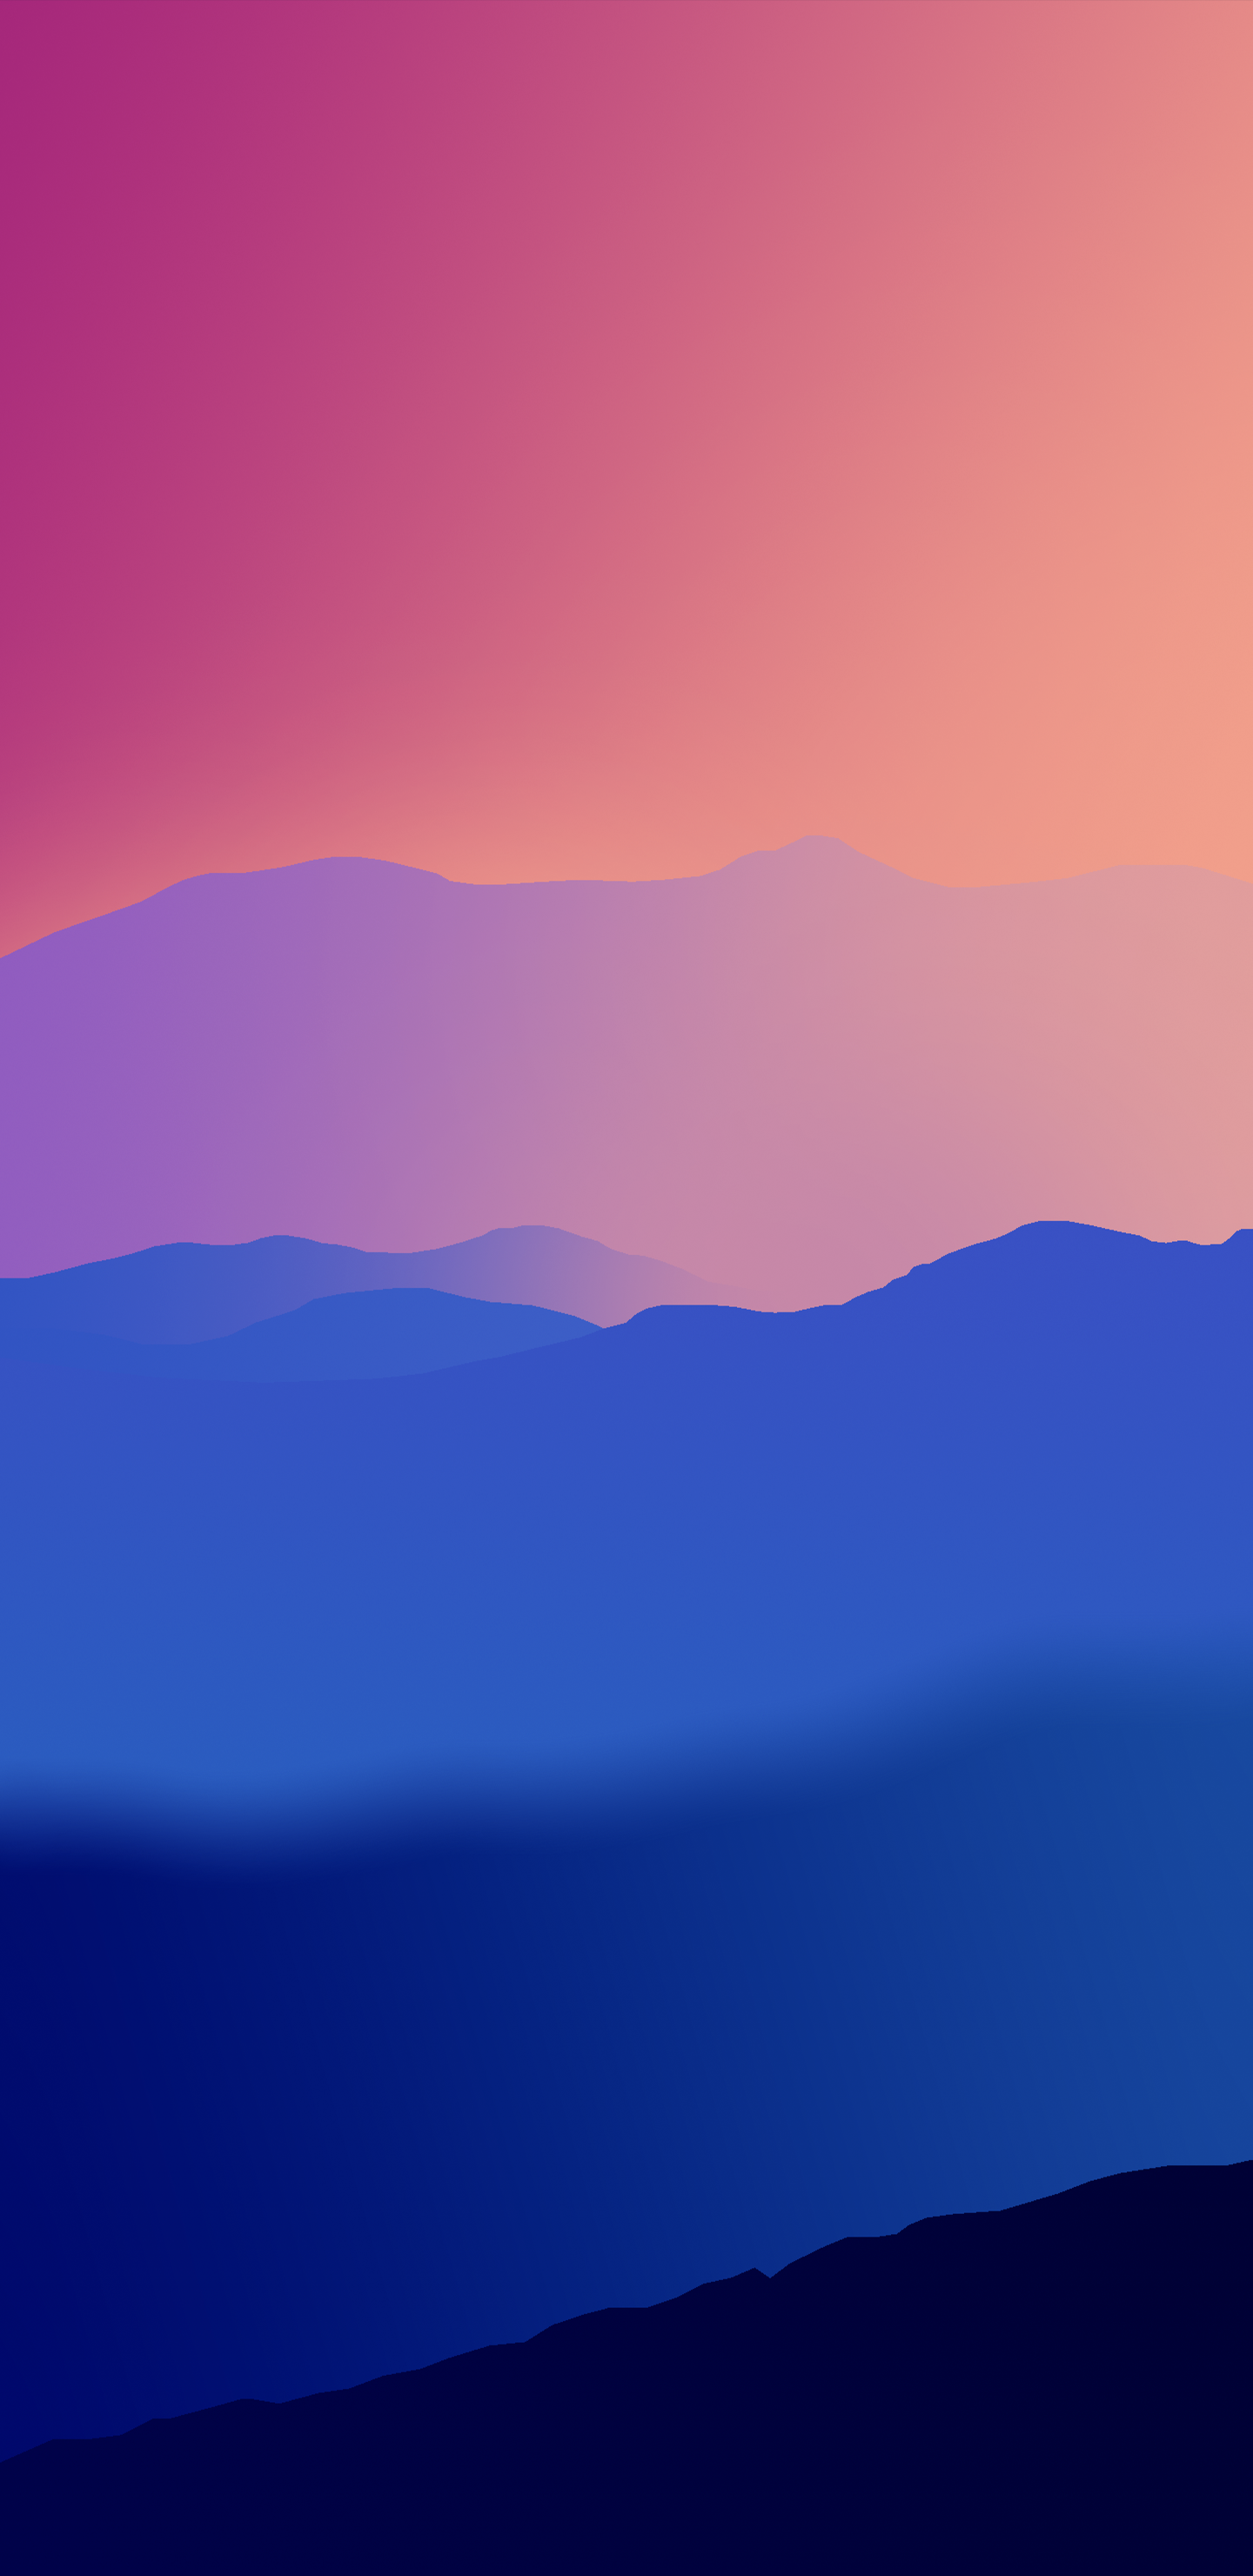 Wallpaper of the week: sunset mountains